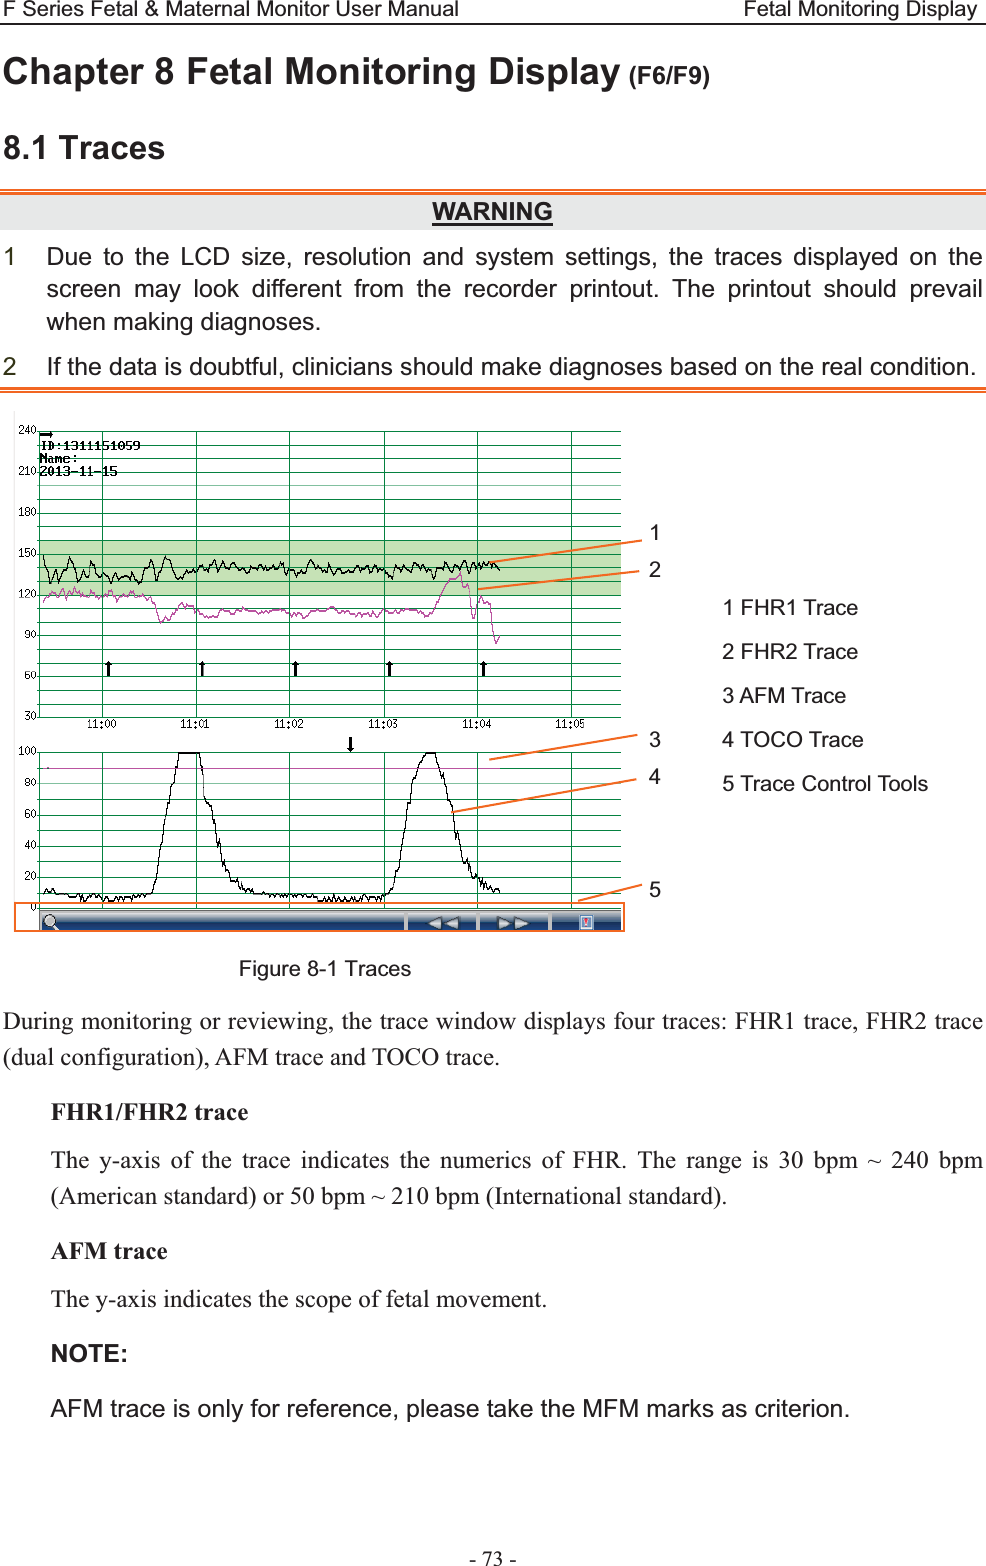 F Series Fetal &amp; Maternal Monitor User Manual                          Fetal Monitoring Display - 73 - Chapter 8 Fetal Monitoring Display (F6/F9)8.1 Traces WARNING1  Due to the LCD size, resolution and system settings, the traces displayed on the screen may look different from the recorder printout. The printout should prevail when making diagnoses. 2  If the data is doubtful, clinicians should make diagnoses based on the real condition.    Figure 8-1 Traces During monitoring or reviewing, the trace window displays four traces: FHR1 trace, FHR2 trace (dual configuration), AFM trace and TOCO trace. FHR1/FHR2 trace The y-axis of the trace indicates the numerics of FHR. The range is 30 bpm ~ 240 bpm (American standard) or 50 bpm ~ 210 bpm (International standard). AFM trace The y-axis indicates the scope of fetal movement. NOTE:AFM trace is only for reference, please take the MFM marks as criterion. 1 FHR1 Trace 2 FHR2 Trace 3 AFM Trace 4 TOCO Trace 5 Trace Control Tools 1 2    3 4   5 